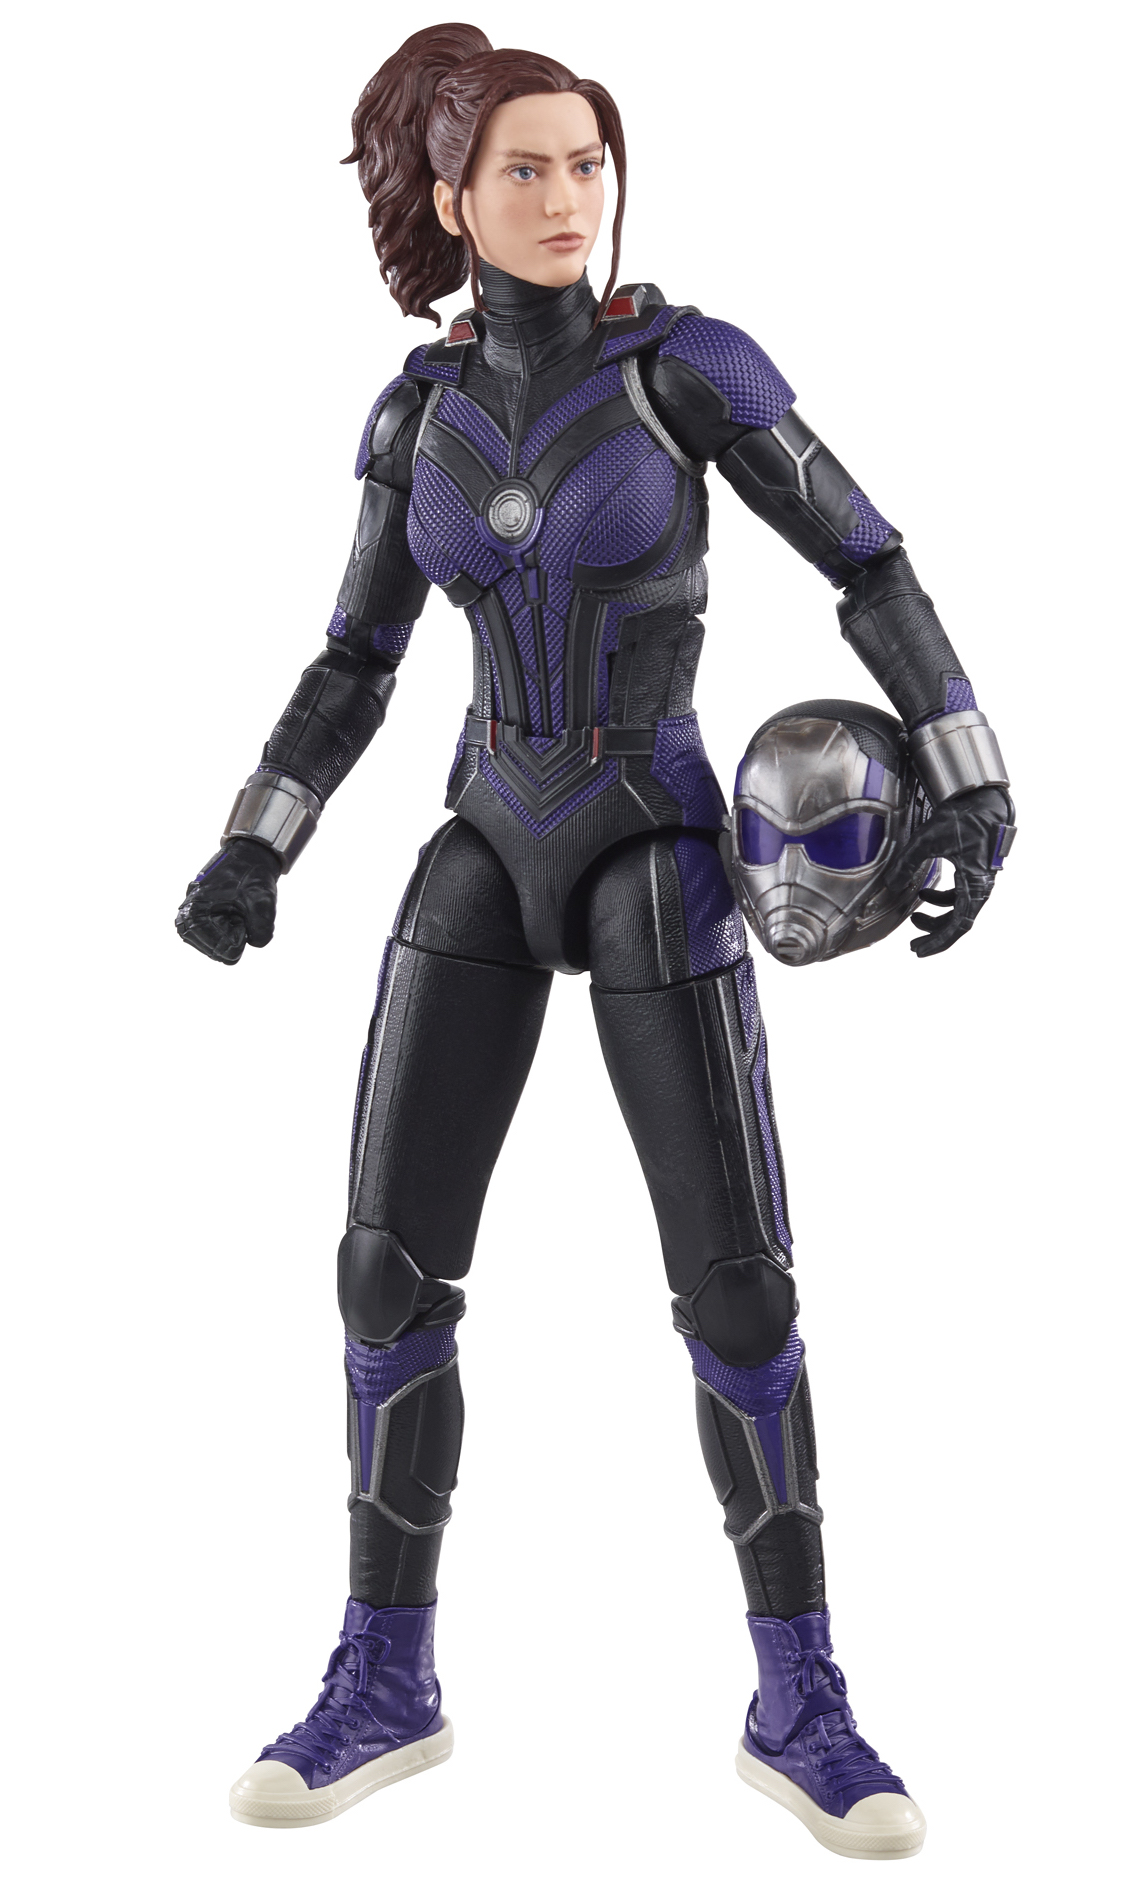 Marvel Legends Ant-Man Quantumania 6-Inch Kang Action Figure